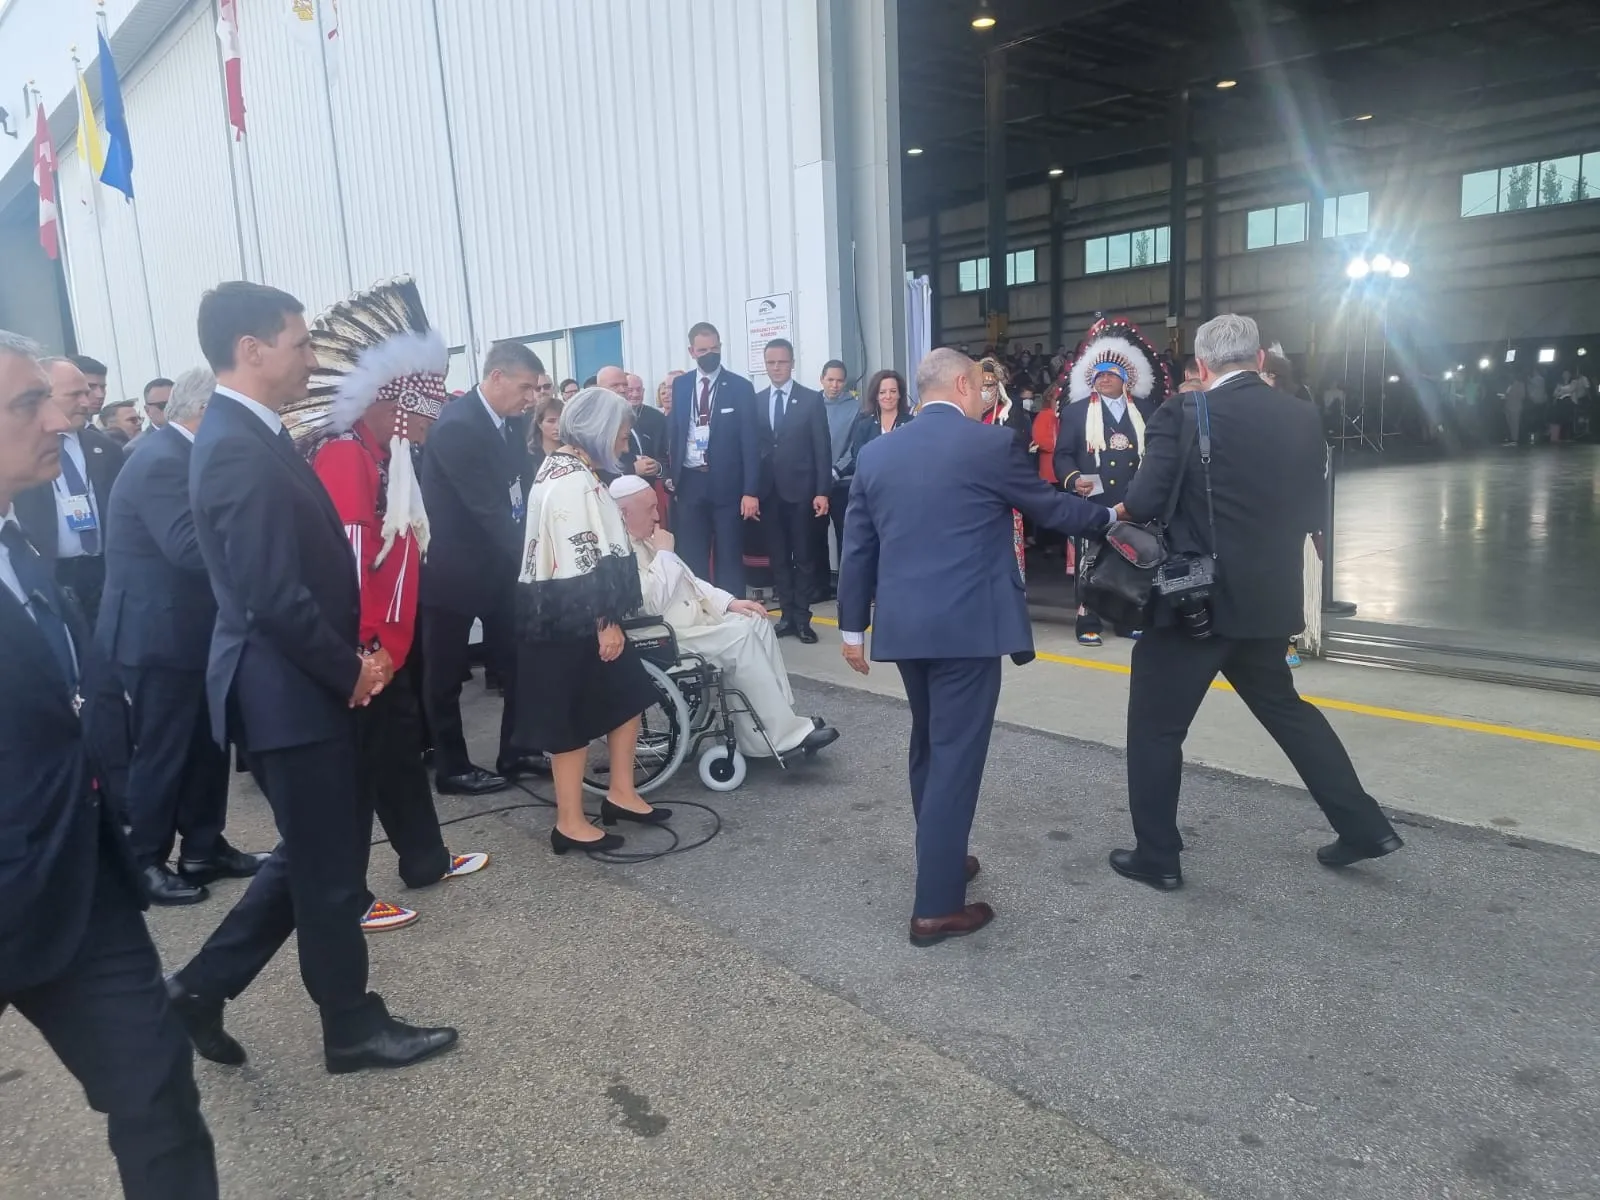 Pope Francis enters a hangar at Edmonton International Airport prior to meeting with representatives of Canada's indigenous peoples on July 24, 2022. Andrea Gagliarducci/CNA